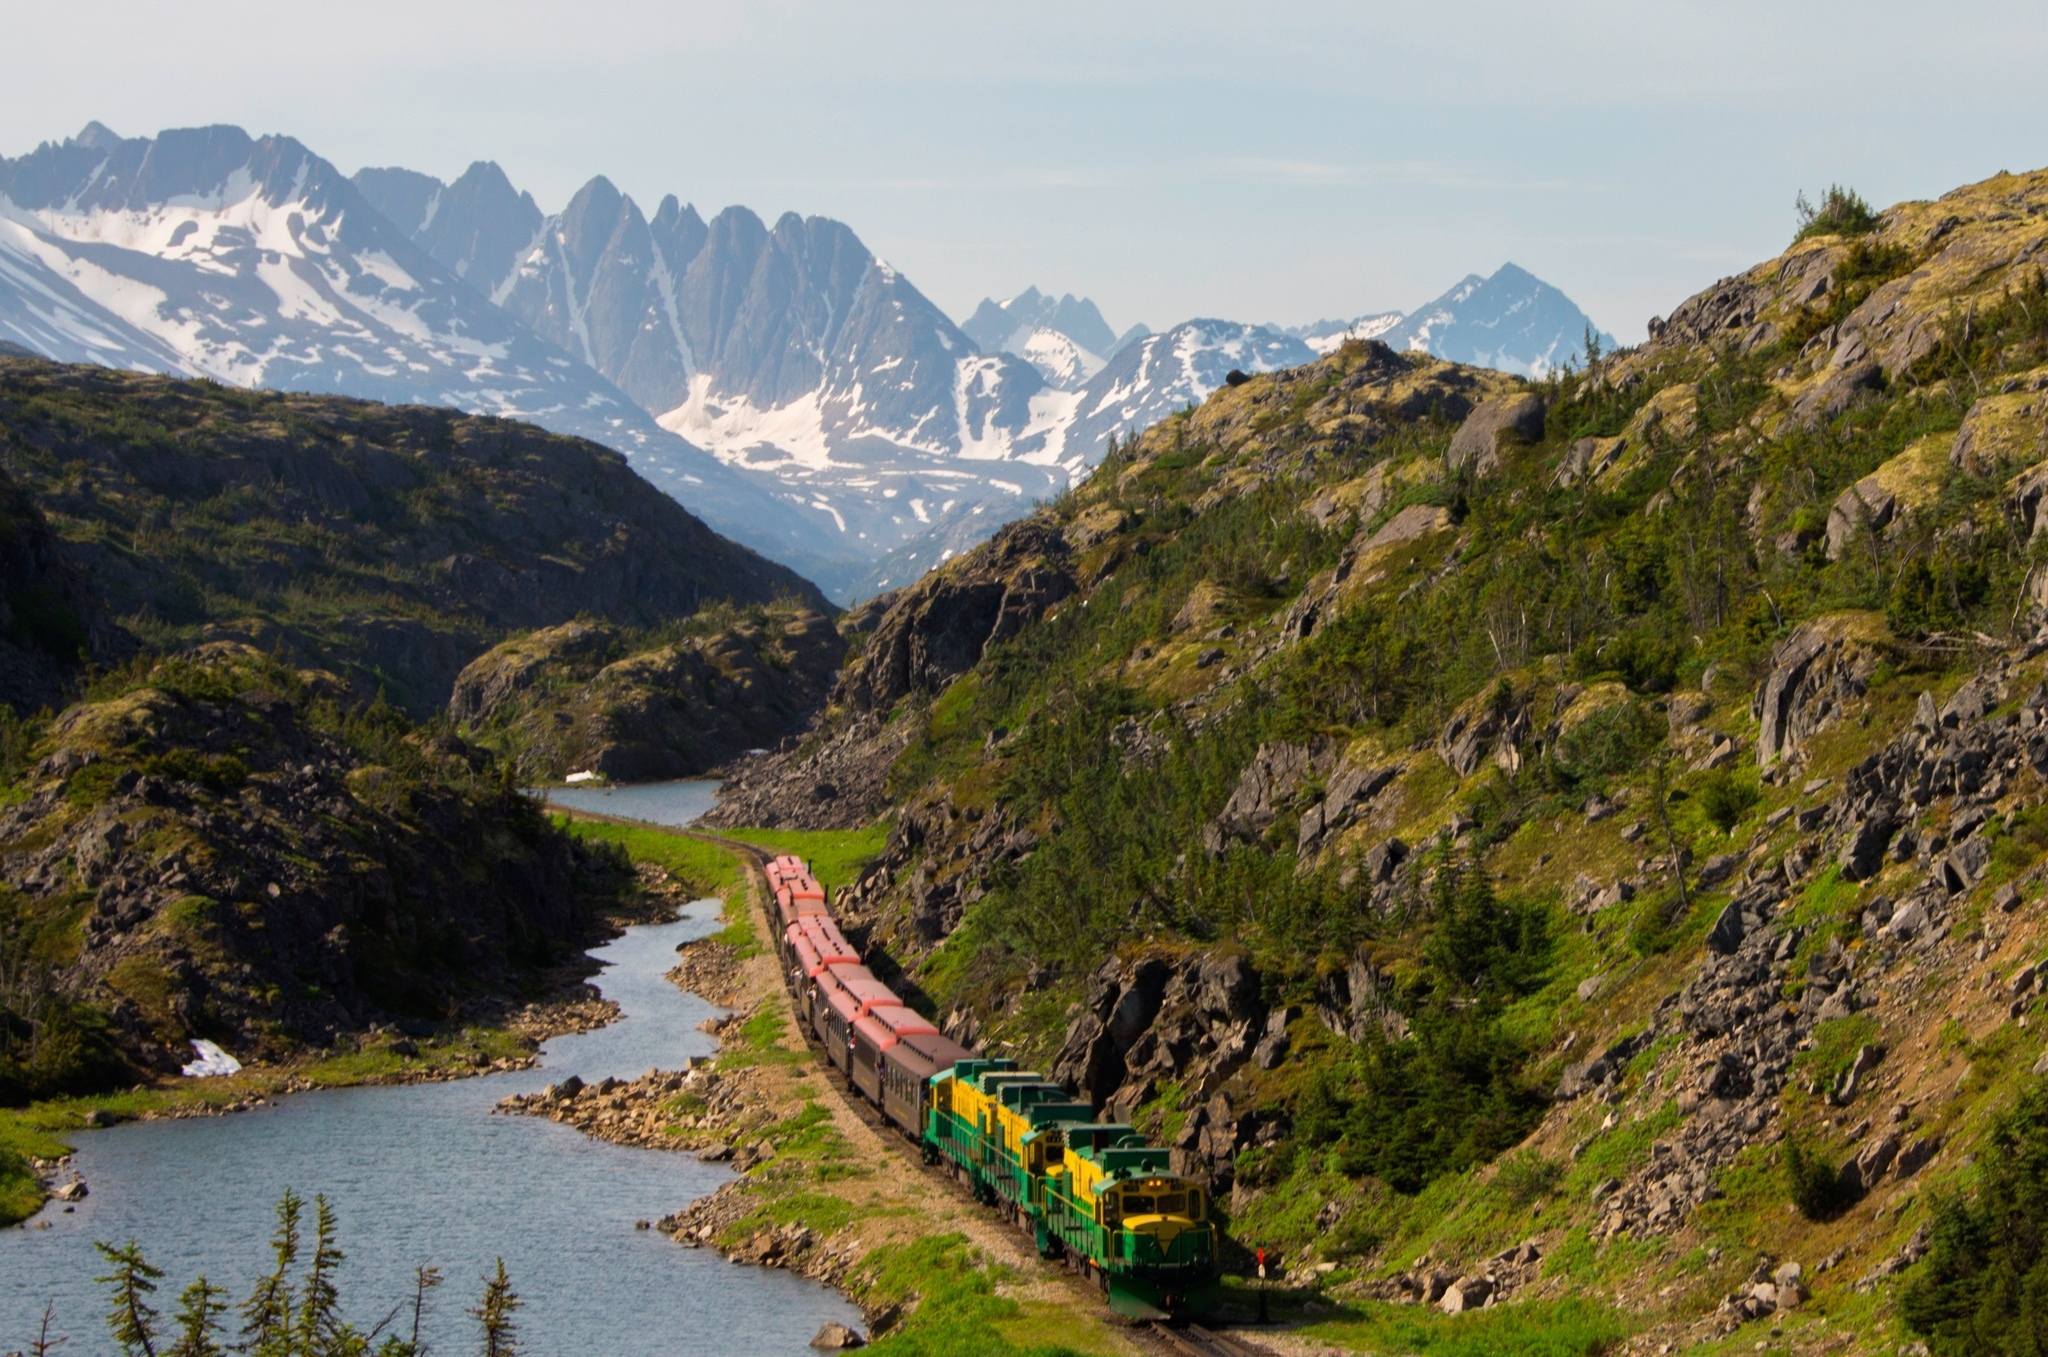 The train moving along the White Pass & Yukon Route surrounded by Alaska mountains and steams